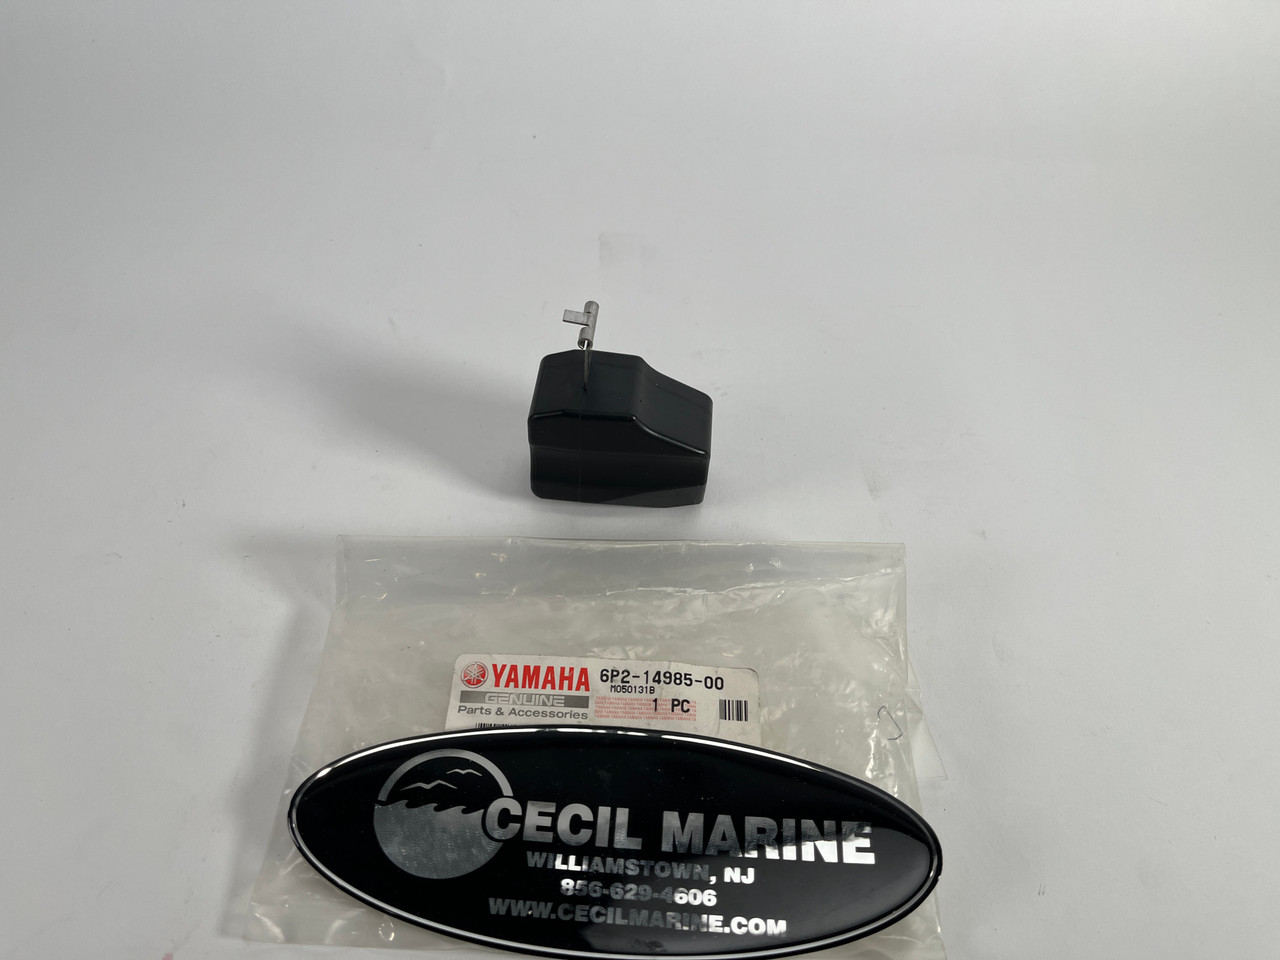 $130.15* GENUINE YAMAHA no tax* FLOAT 6P2-14985-00-00 *In Stock & Ready To Ship